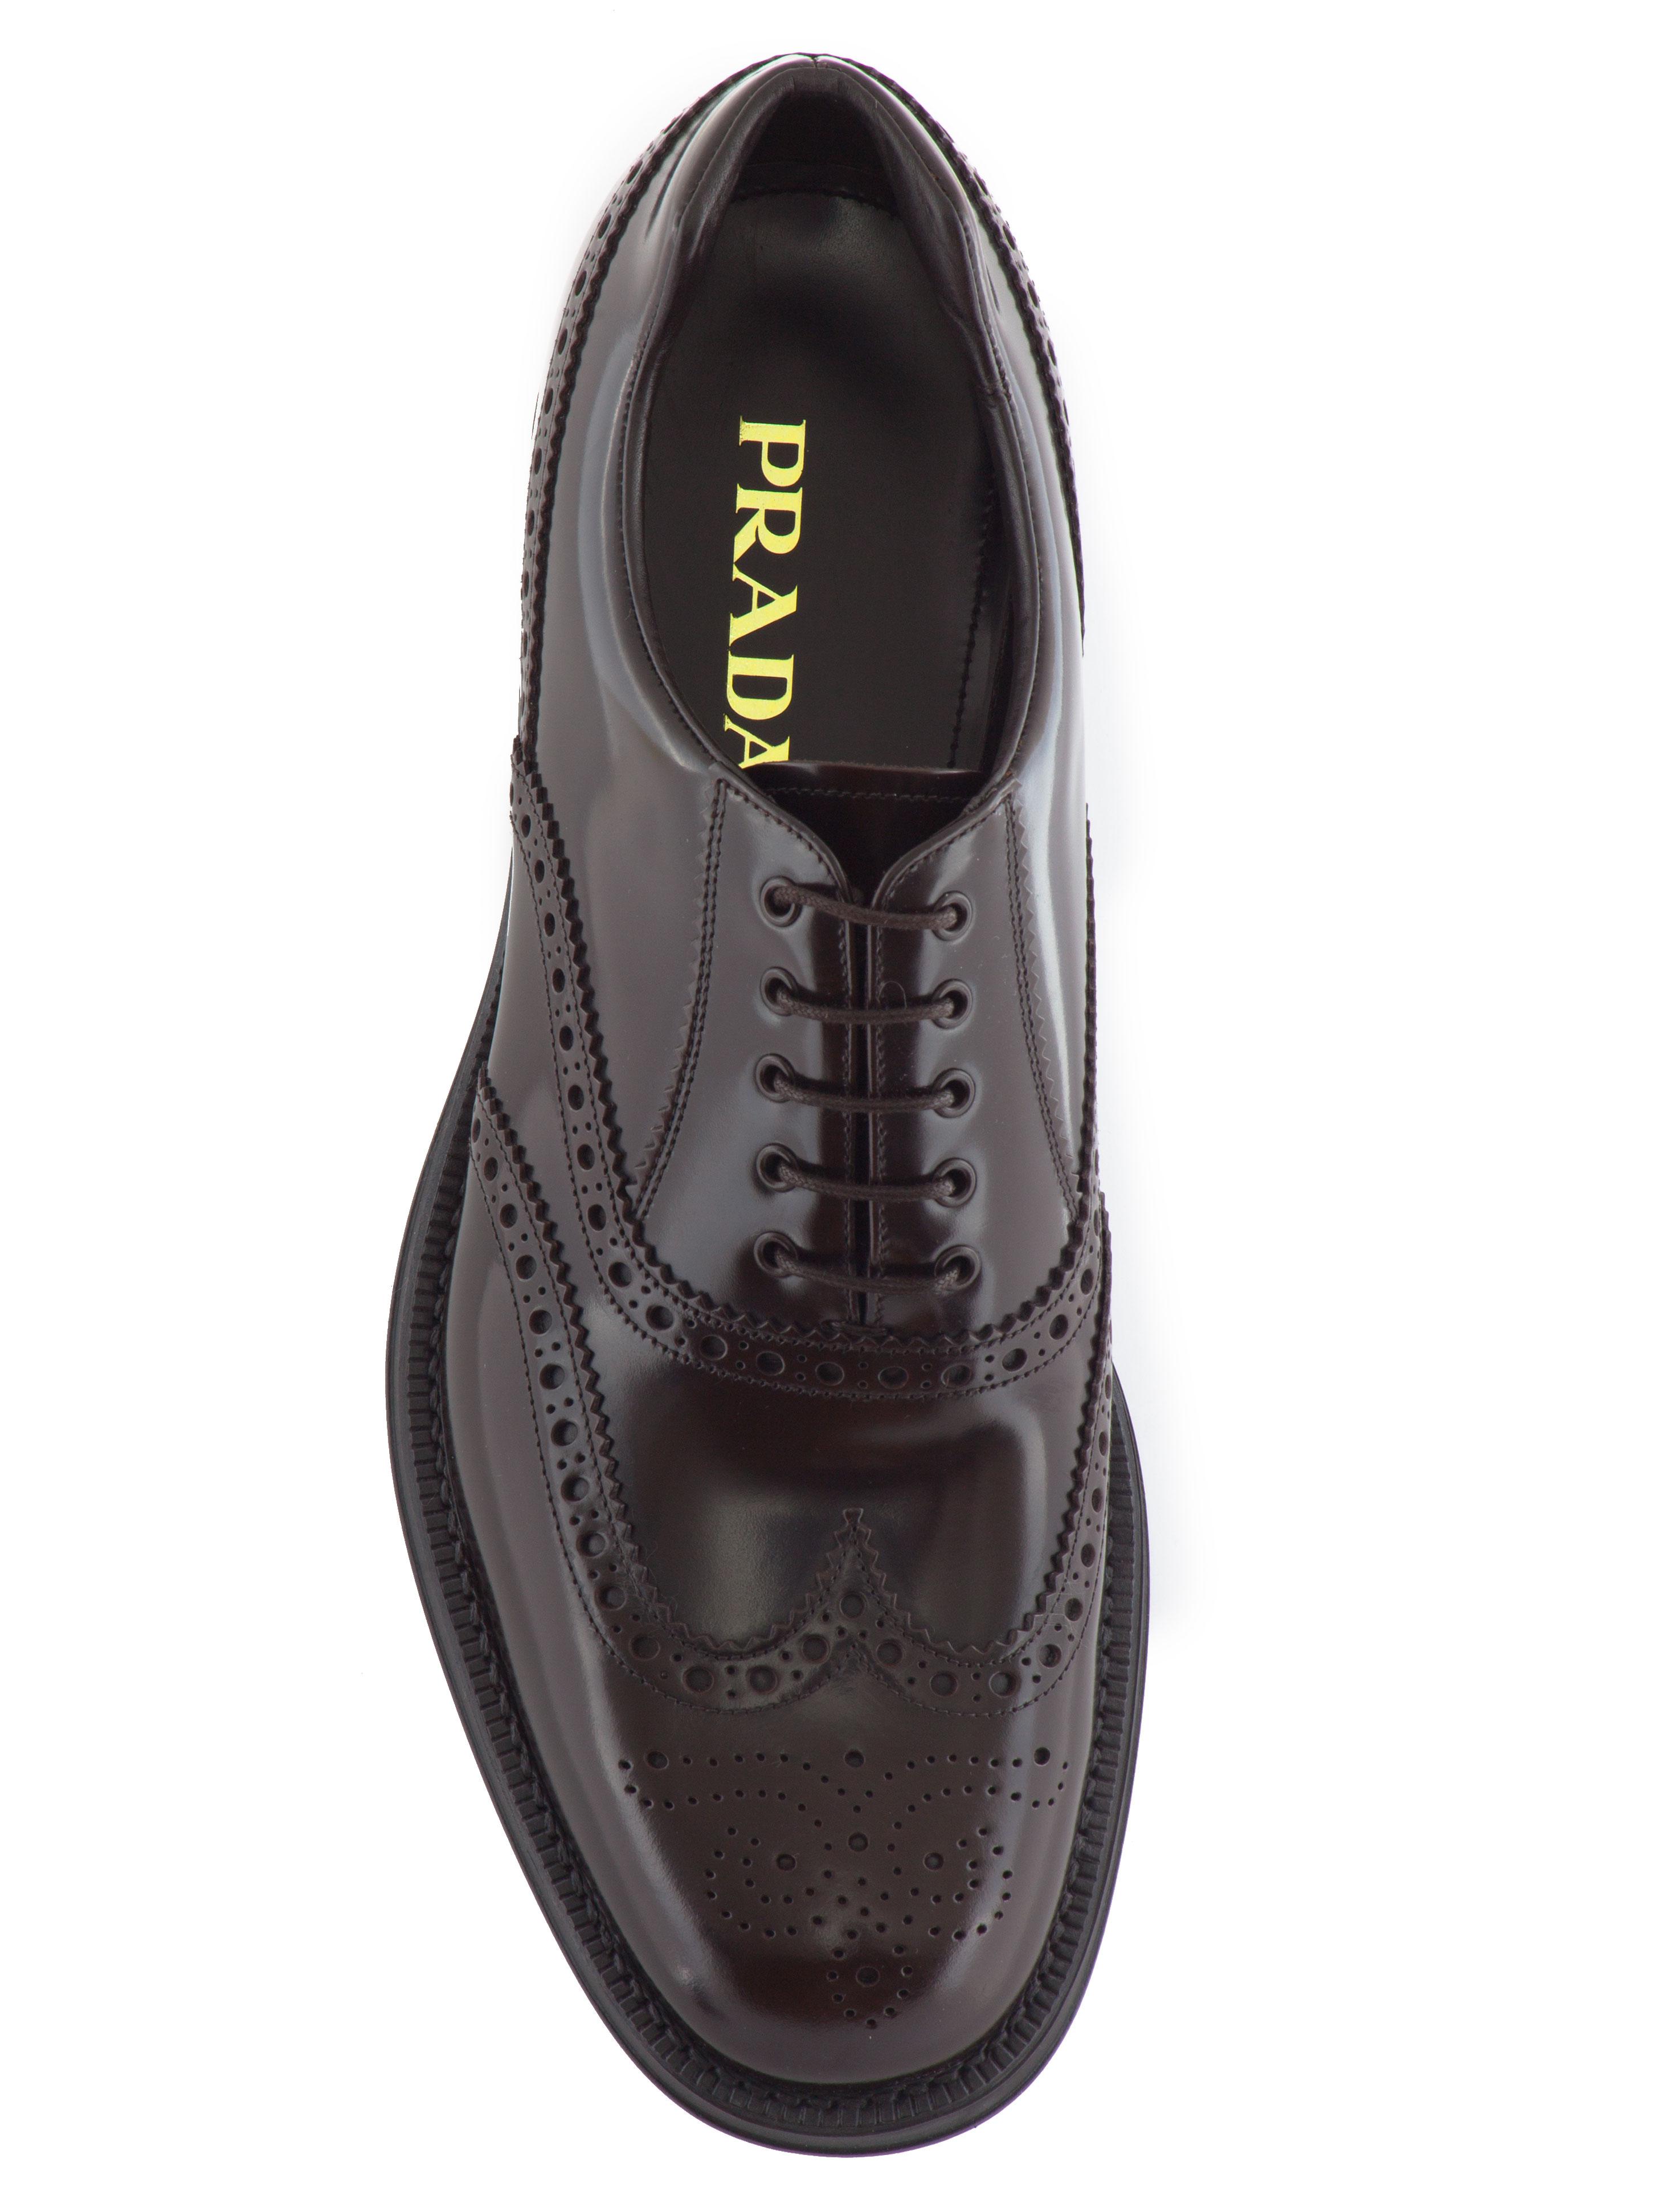 Prada Rubber Sole Leather Oxford Shoes in Brown for Men - Lyst